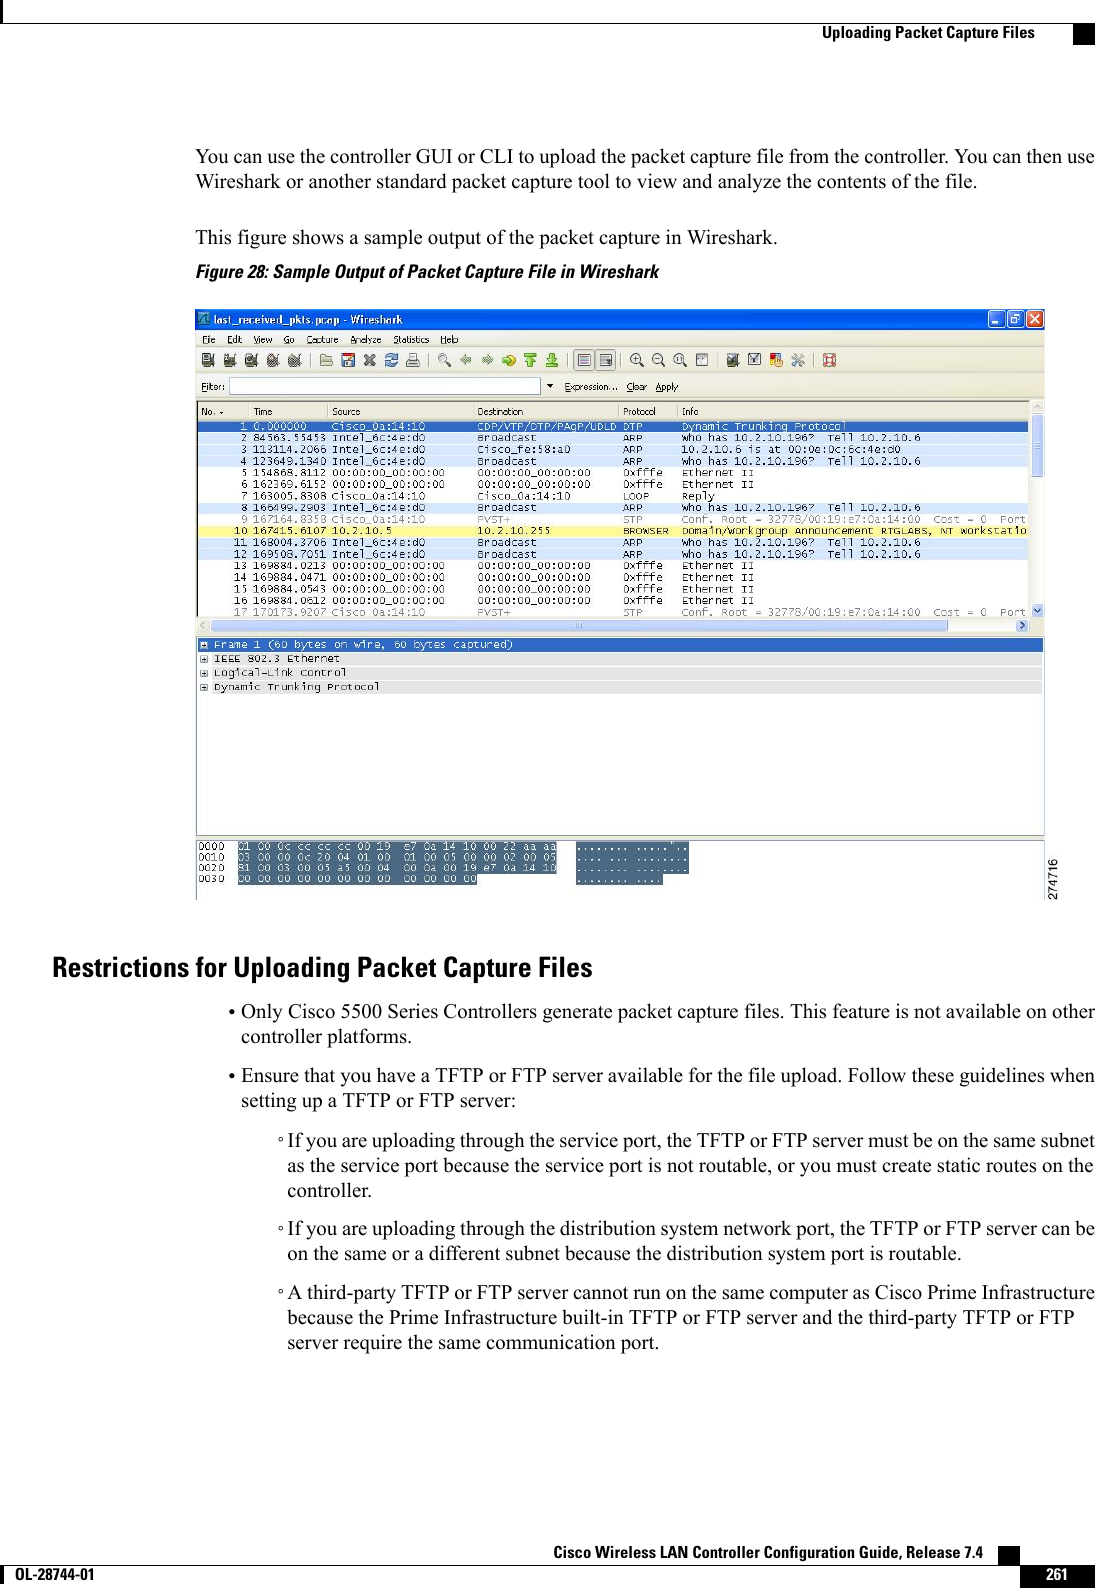 You can use the controller GUI or CLI to upload the packet capture file from the controller. You can then useWireshark or another standard packet capture tool to view and analyze the contents of the file.This figure shows a sample output of the packet capture in Wireshark.Figure 28: Sample Output of Packet Capture File in WiresharkRestrictions for Uploading Packet Capture Files•Only Cisco 5500 Series Controllers generate packet capture files. This feature is not available on othercontroller platforms.•Ensure that you have a TFTP or FTP server available for the file upload. Follow these guidelines whensetting up a TFTP or FTP server:◦If you are uploading through the service port, the TFTP or FTP server must be on the same subnetas the service port because the service port is not routable, or you must create static routes on thecontroller.◦If you are uploading through the distribution system network port, the TFTP or FTP server can beon the same or a different subnet because the distribution system port is routable.◦A third-party TFTP or FTP server cannot run on the same computer as Cisco Prime Infrastructurebecause the Prime Infrastructure built-in TFTP or FTP server and the third-party TFTP or FTPserver require the same communication port.Cisco Wireless LAN Controller Configuration Guide, Release 7.4       OL-28744-01 261Uploading Packet Capture Files